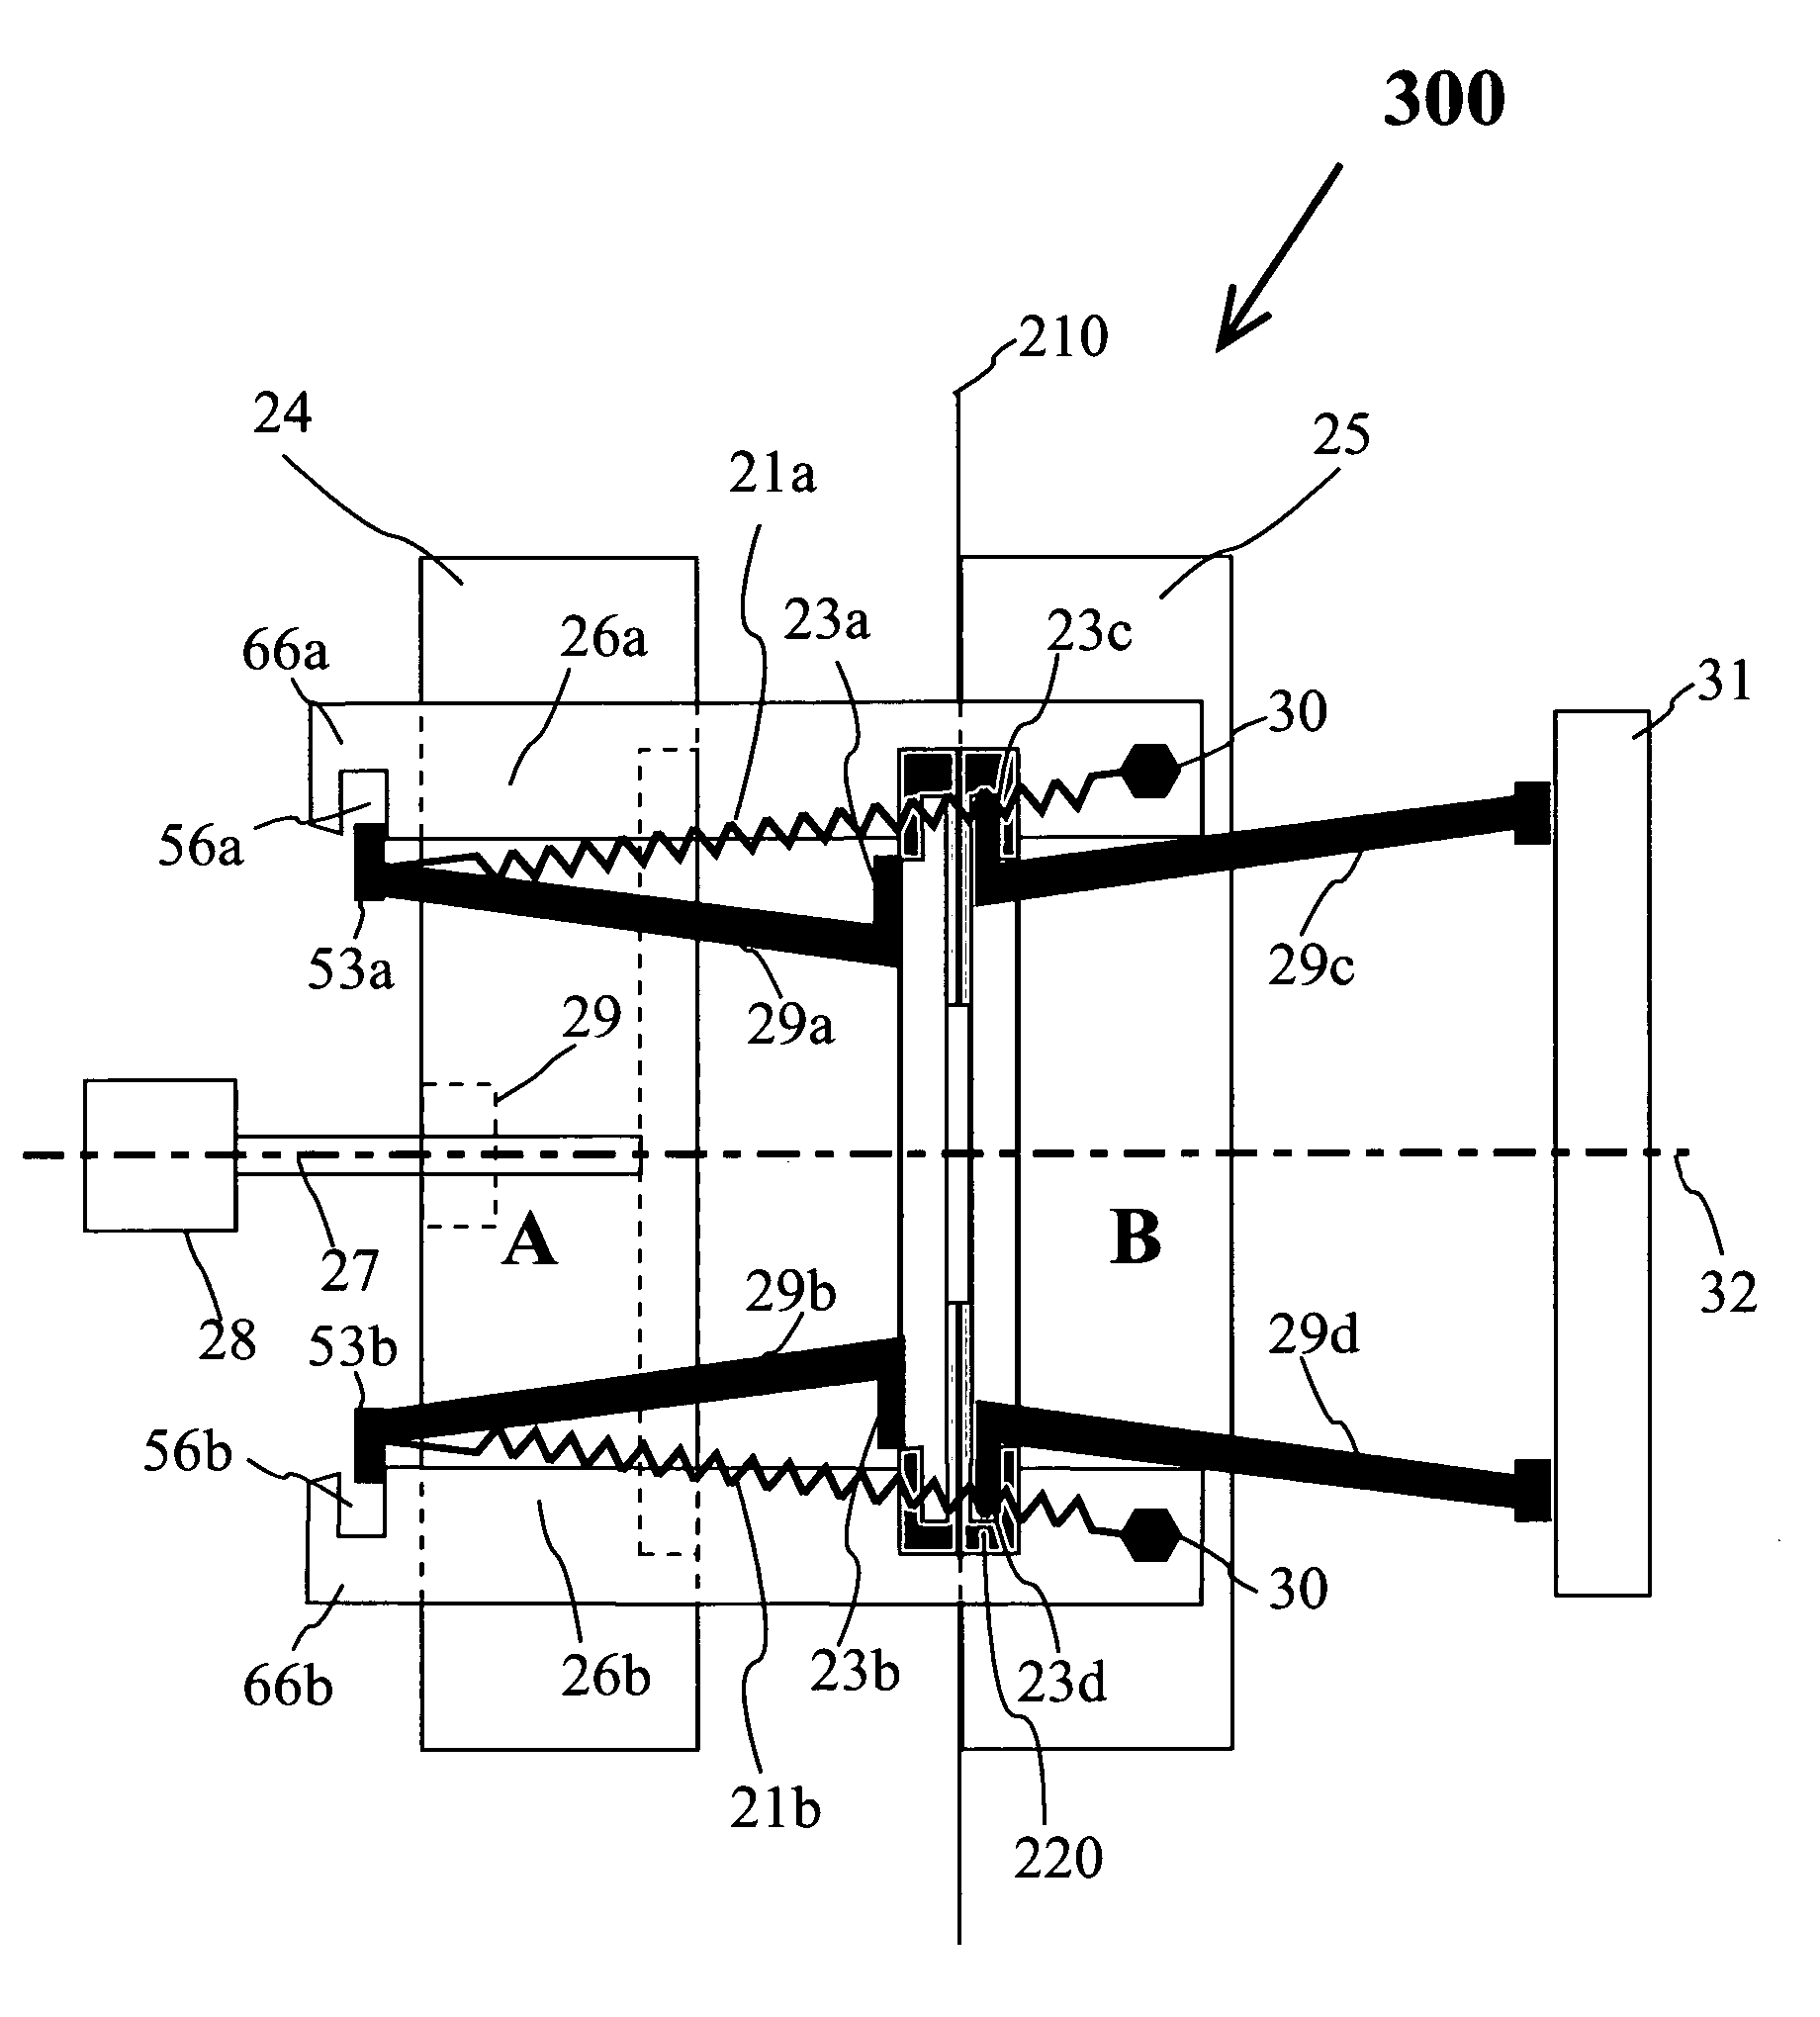 Polymeric injection mold with retractable bars for producing re-entrant molded surfaces